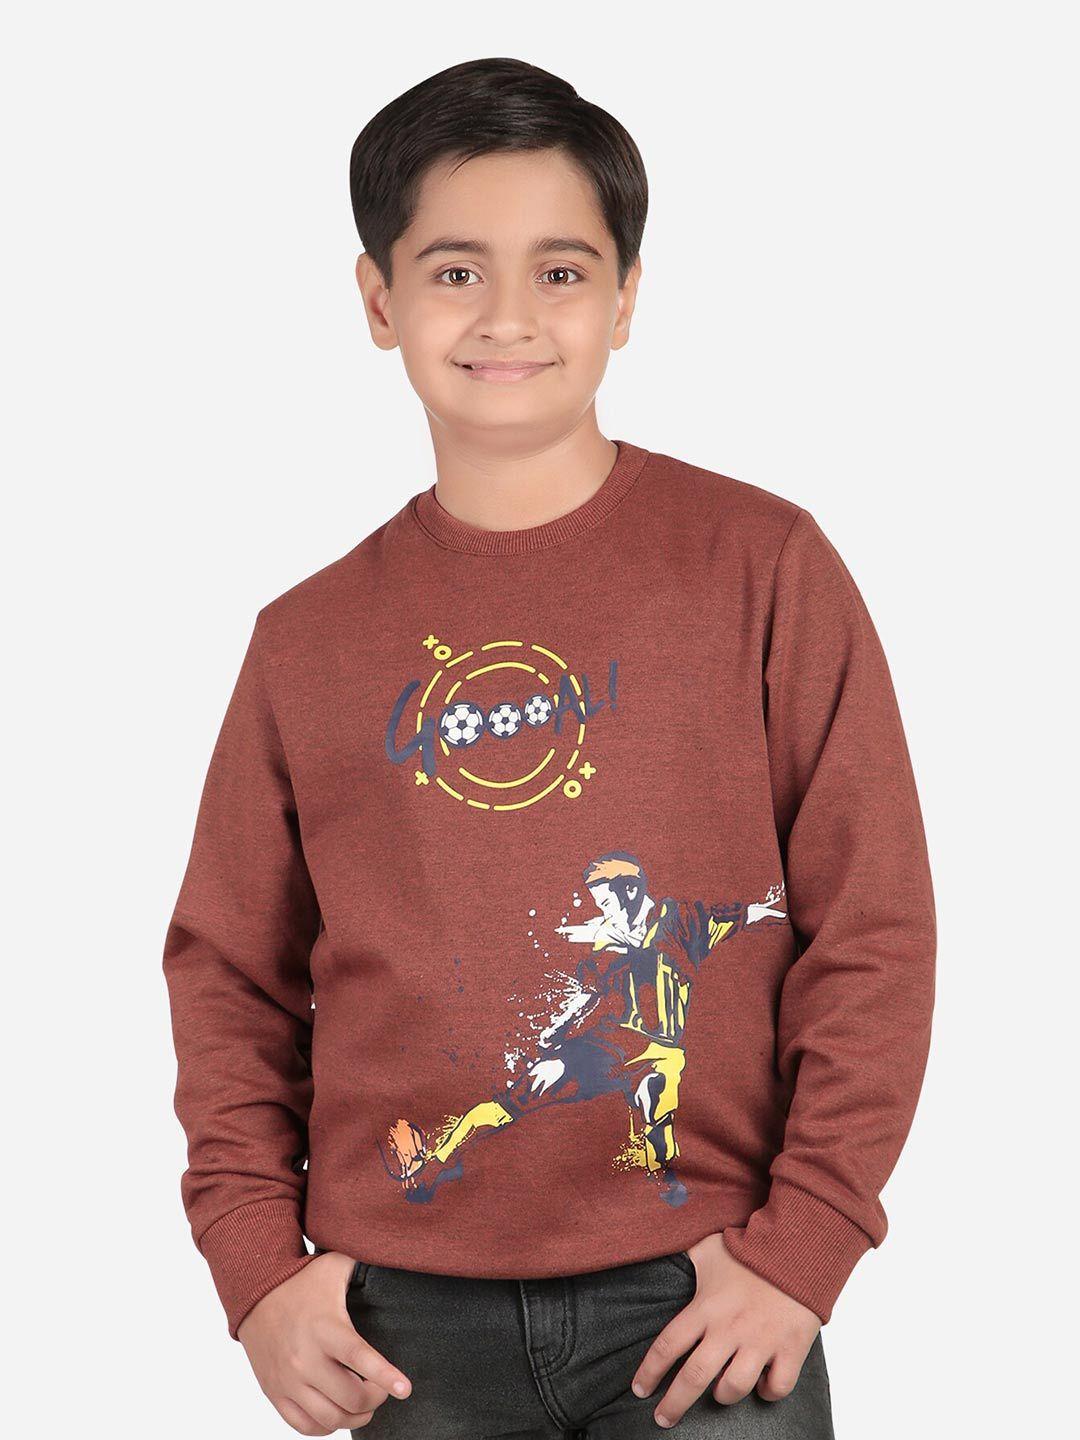 bodycare-kids-boys-graphic-printed-long-sleeves-fleece-pullover